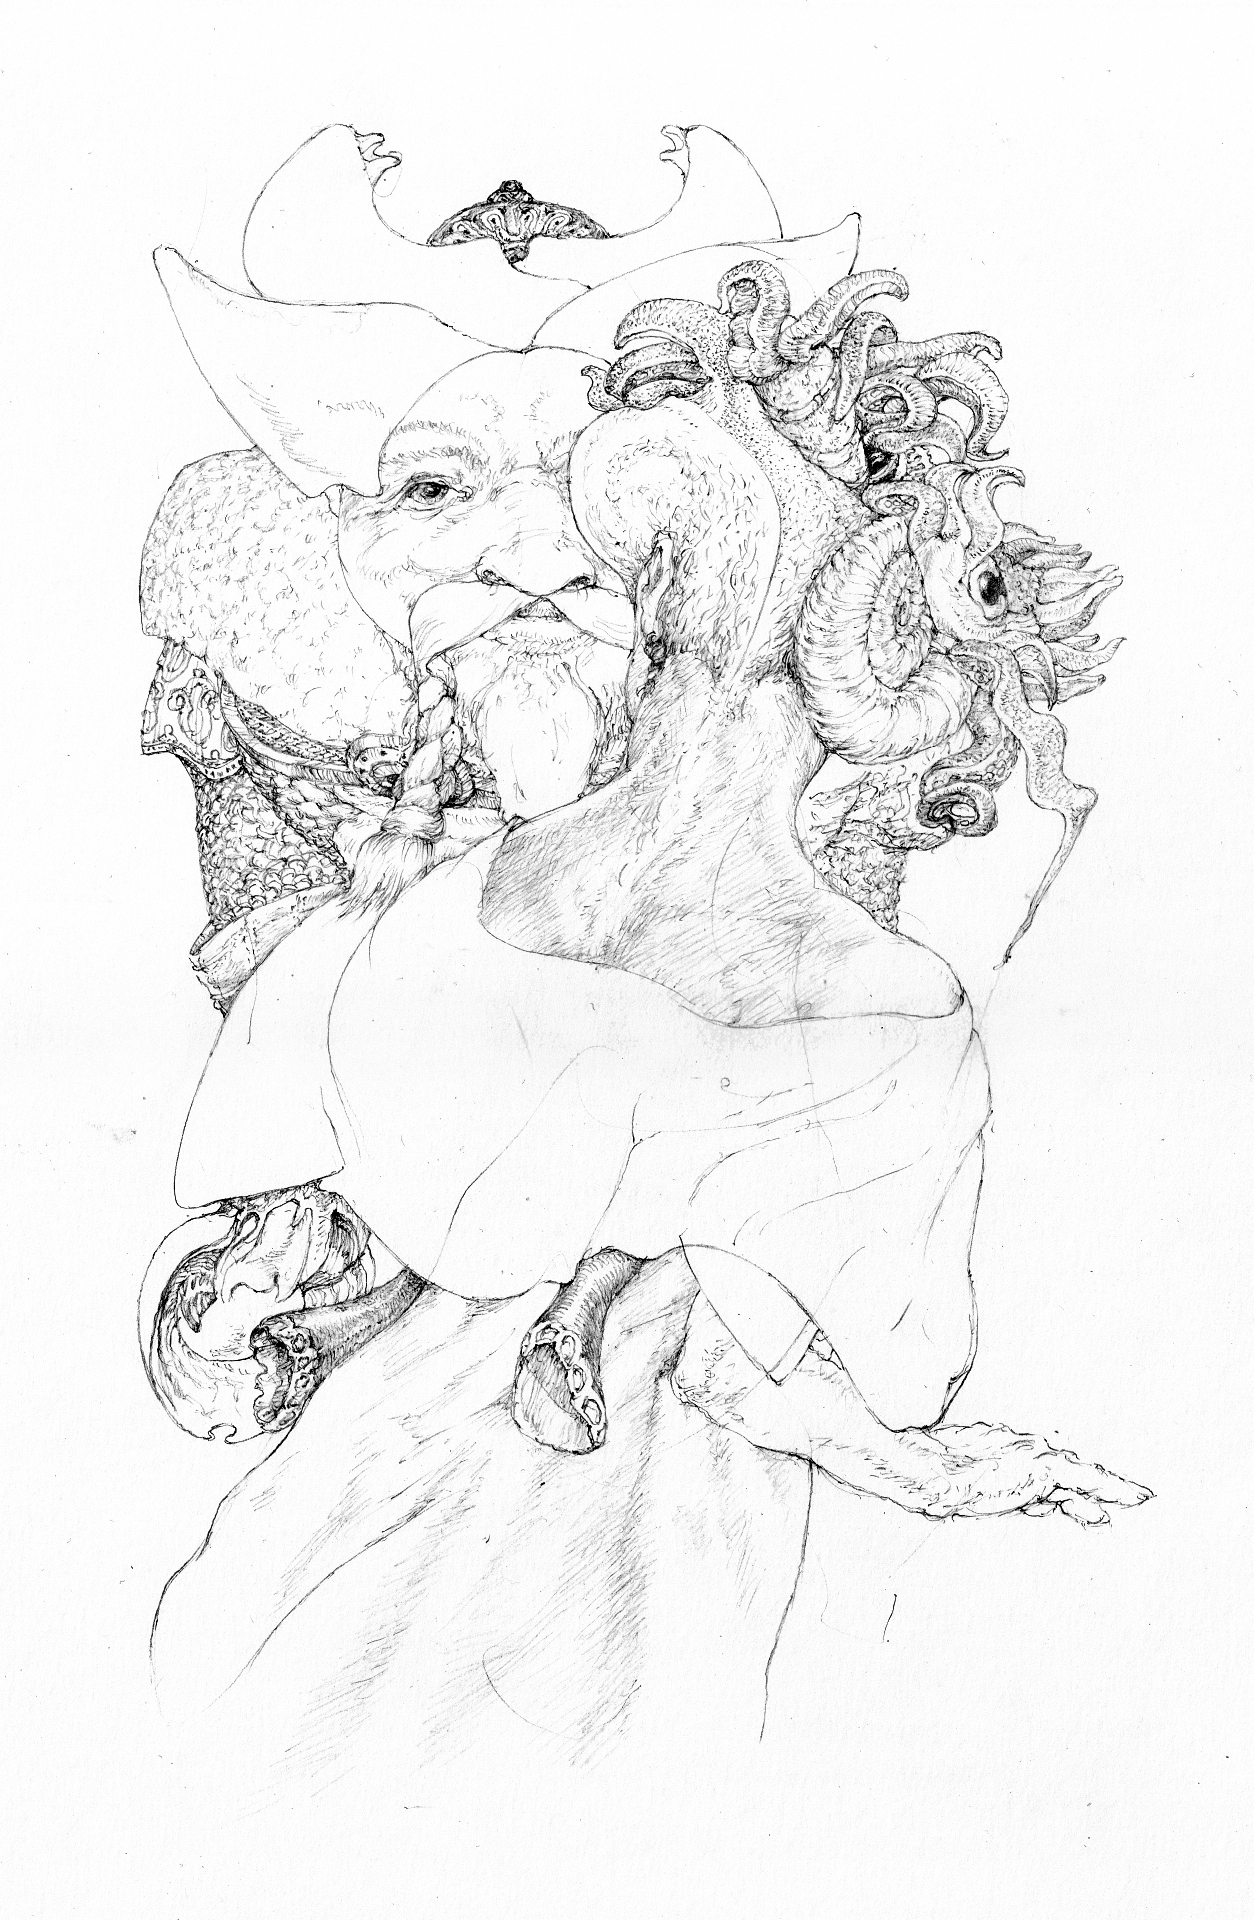 10. Recent drawings series. 
<strong>Checkmate; Knight takes White Queen</strong>
Nautical chess.
(2b Pencil drawing, A3. 180grm. Canson “Bristol”)